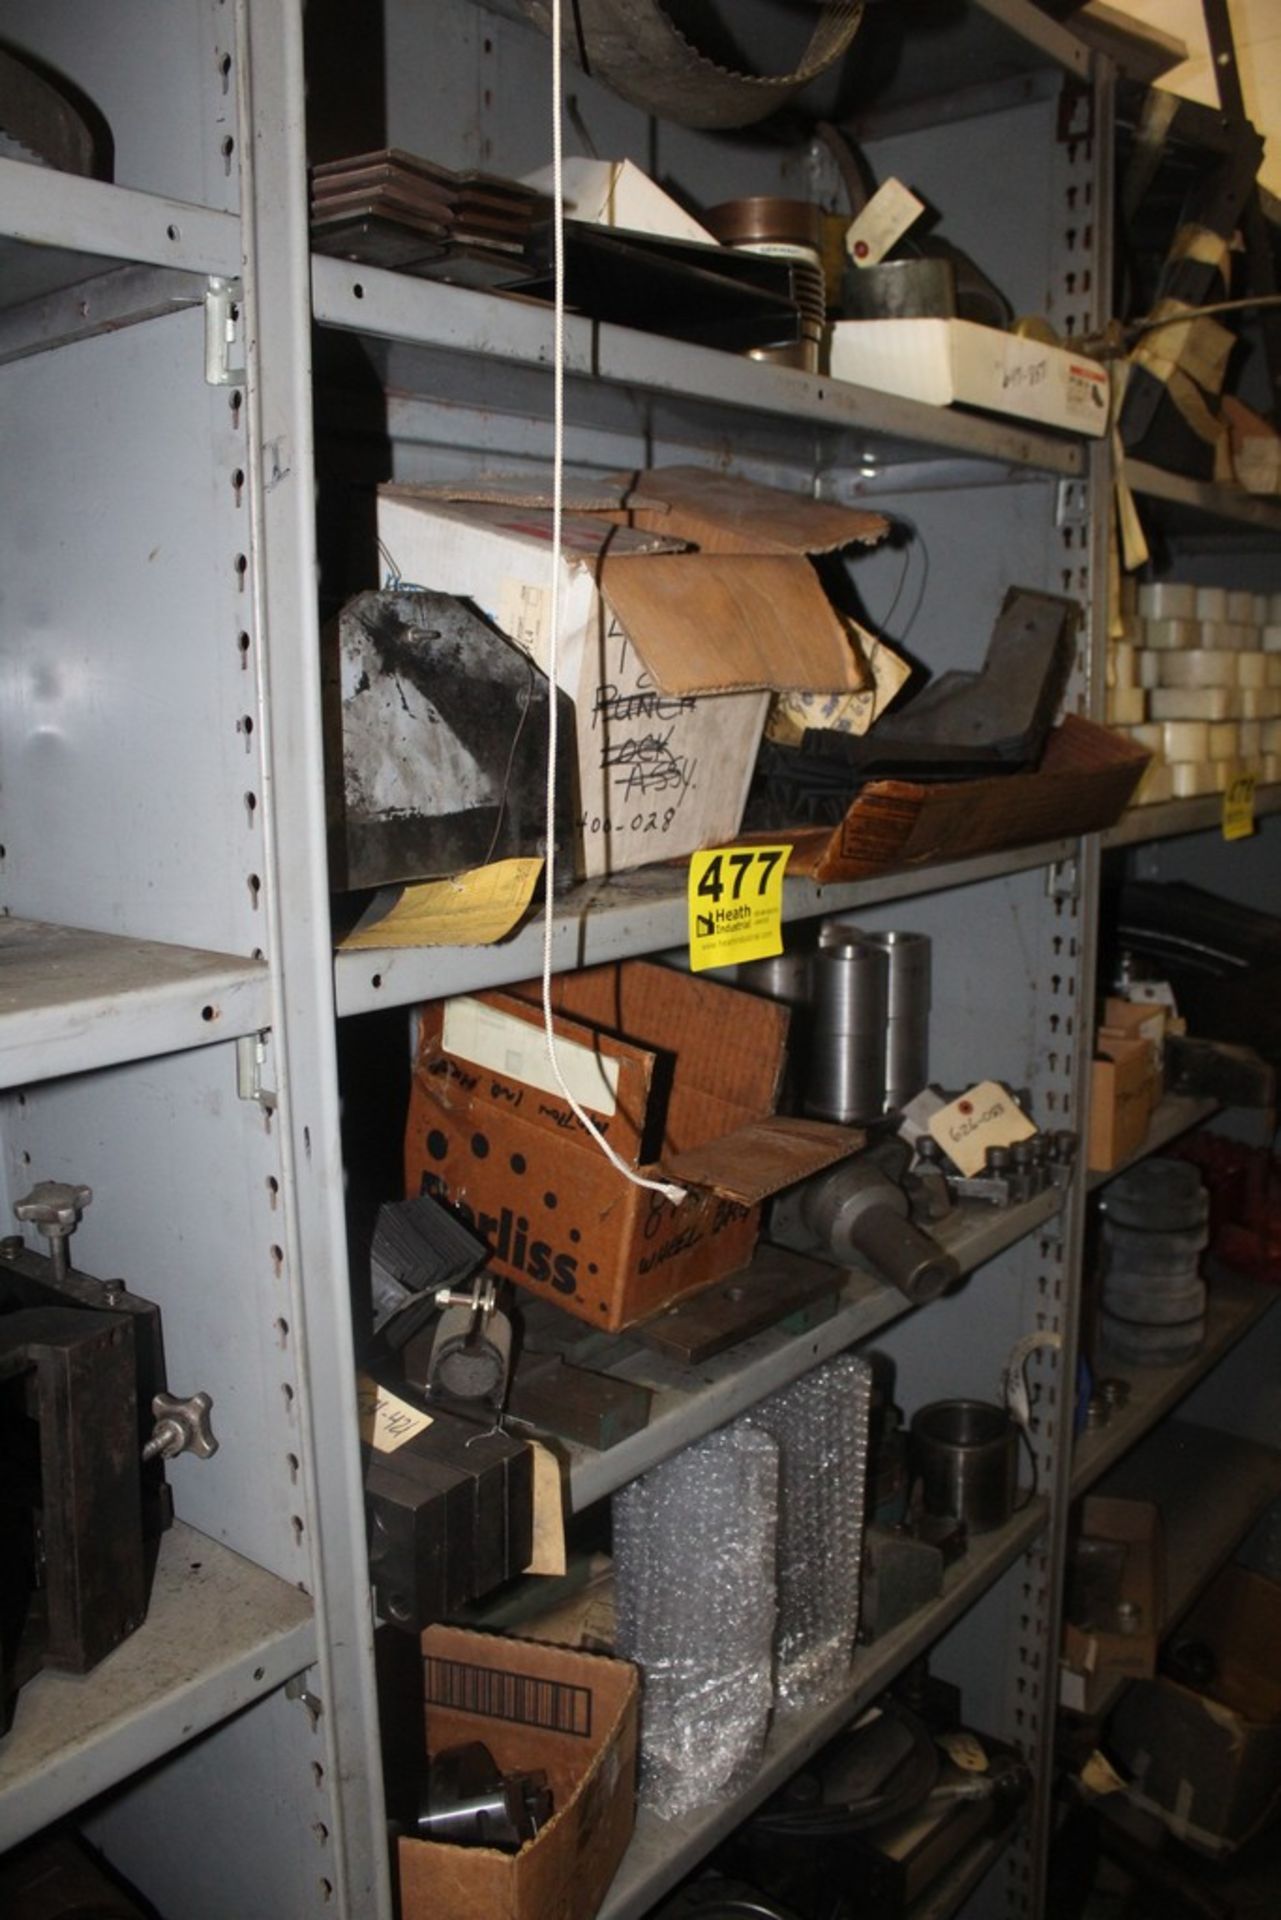 ASSORTED WHITNEY PARTS ON (1) SECTION OF SHELVING: 647 COUPLERS, ENCODERS, 630 DROP STOPS, Y-GAGING,